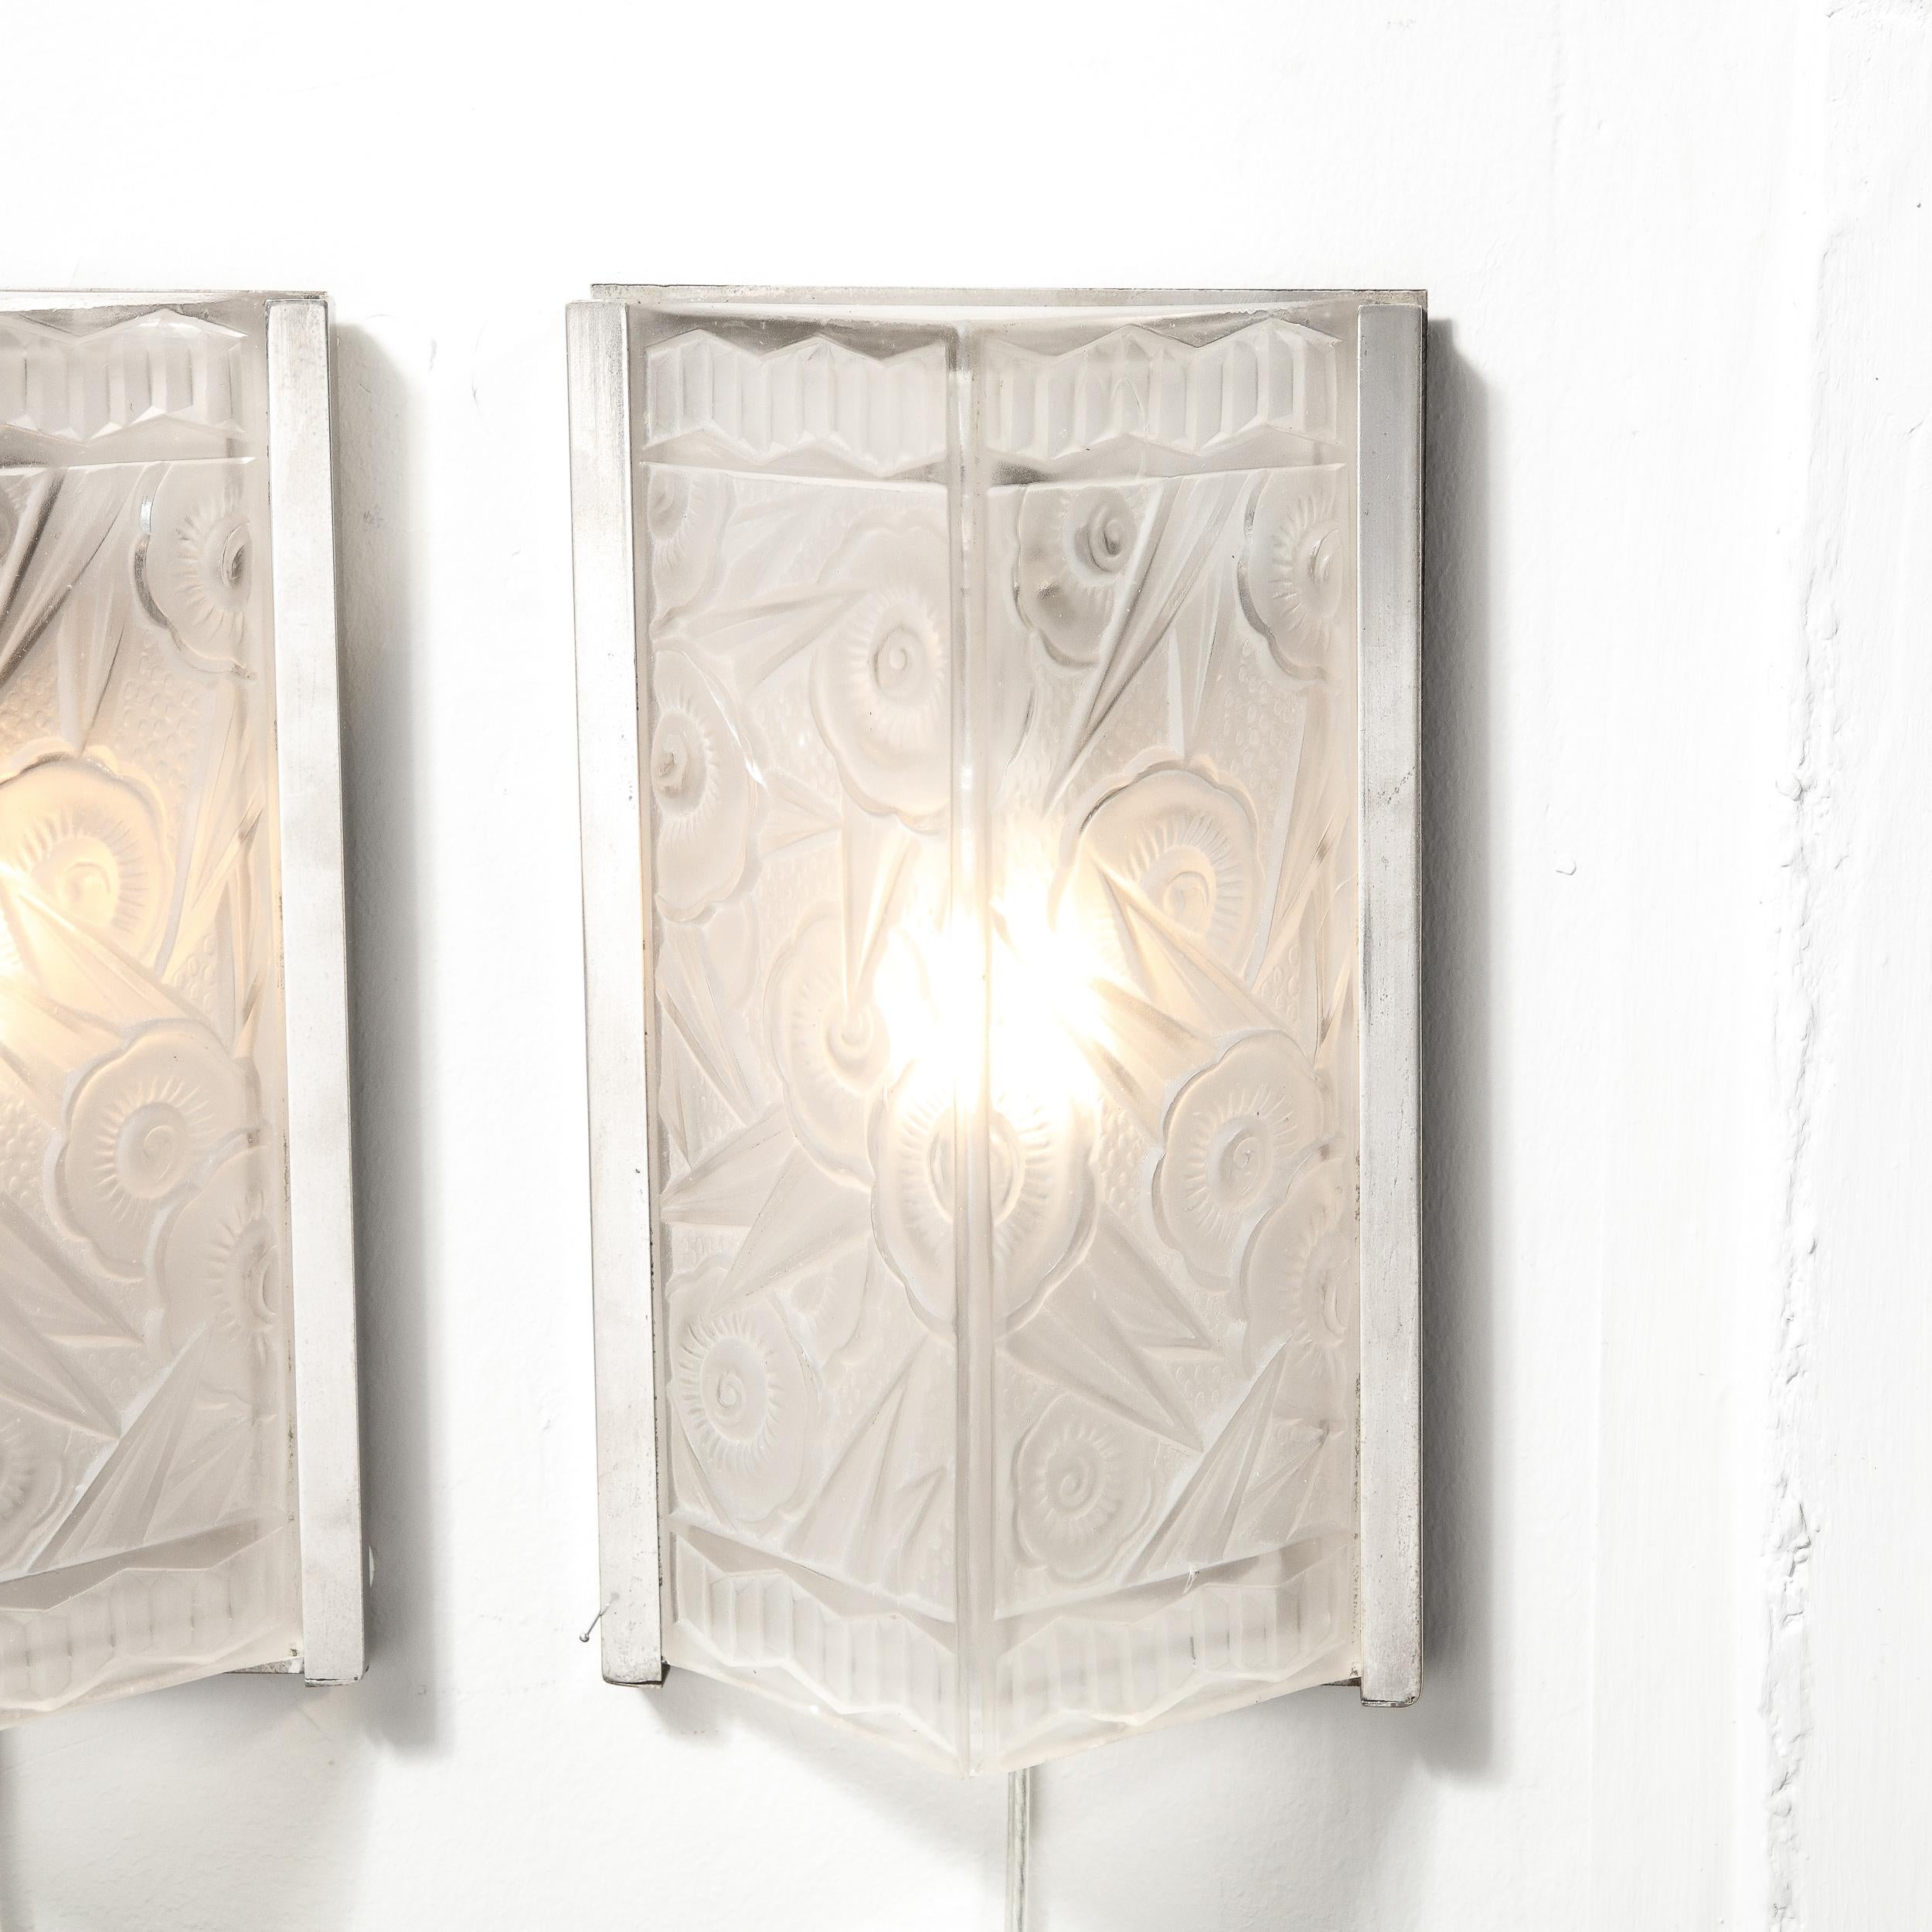 Pair of Art Deco Molded & Frosted Glass Sconces w/ Stylized Cubist Floral Motifs 1